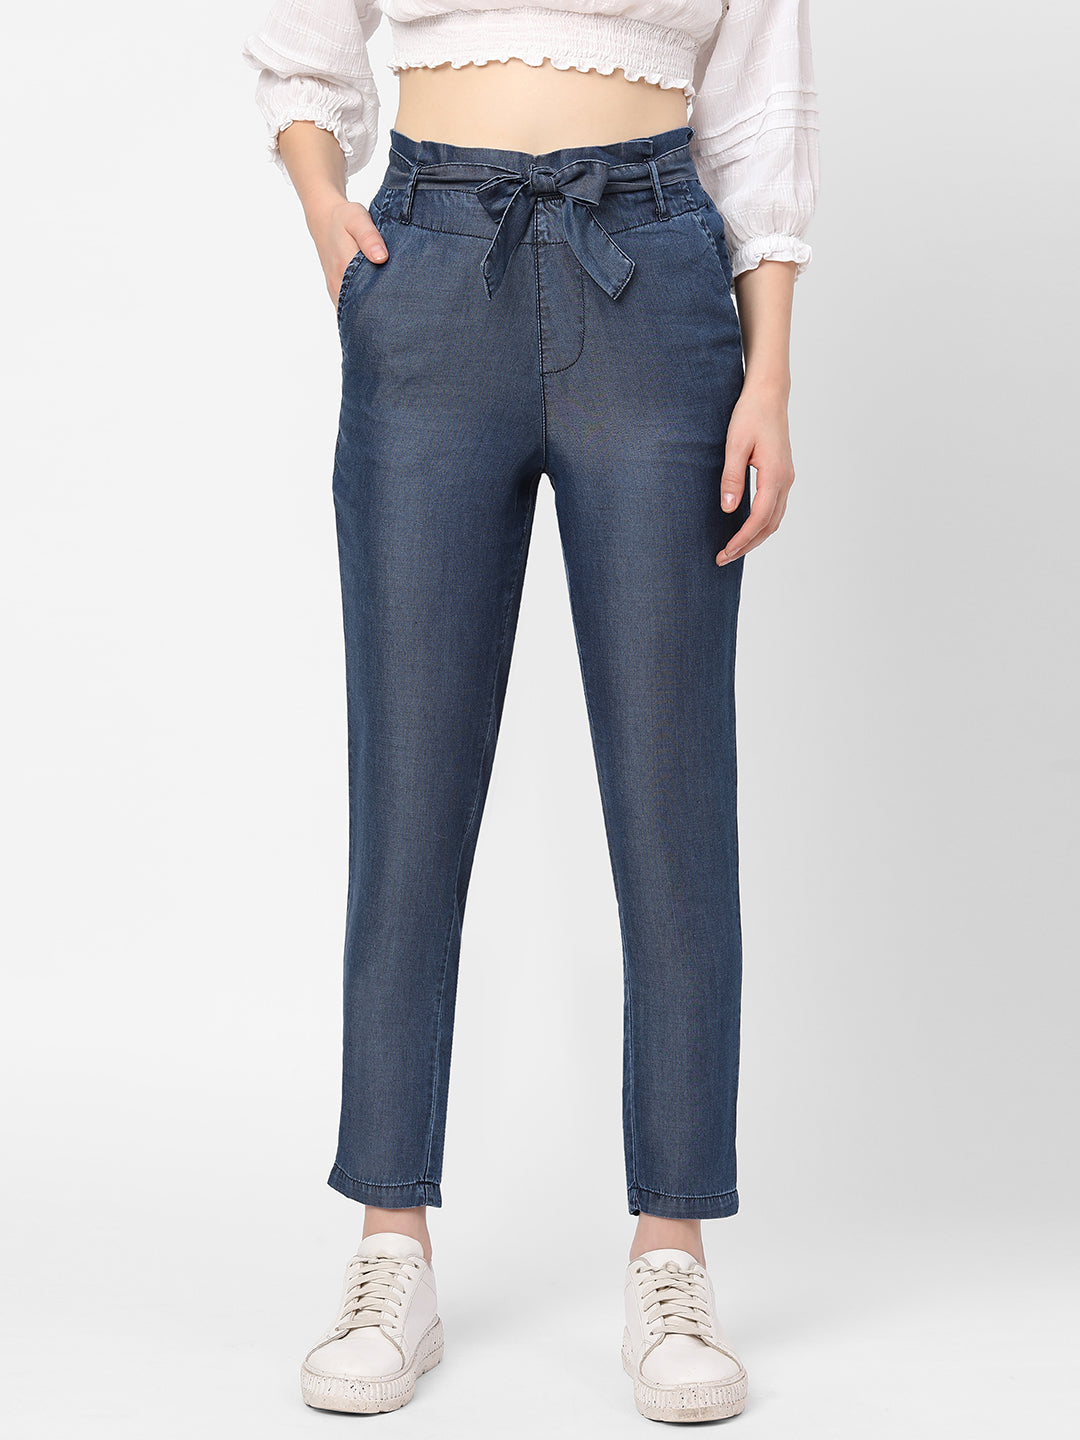 The Jolie Jeans: High Rise Ruched Bottom Skinny Jean– MomQueenBoutique